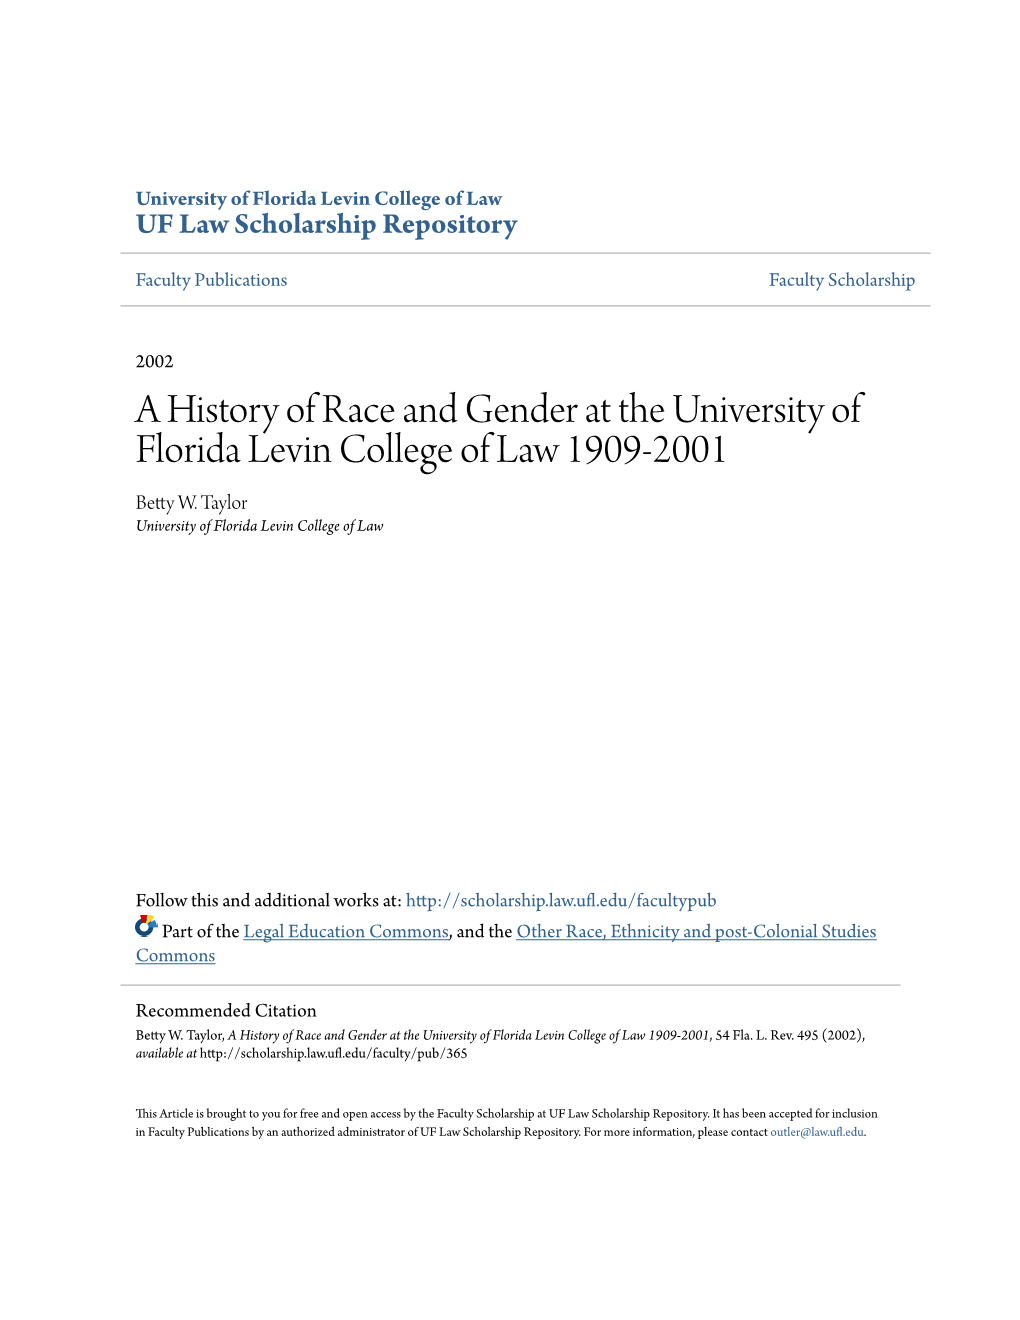 A History of Race and Gender at the University of Florida Levin College of Law 1909-2001 Betty W